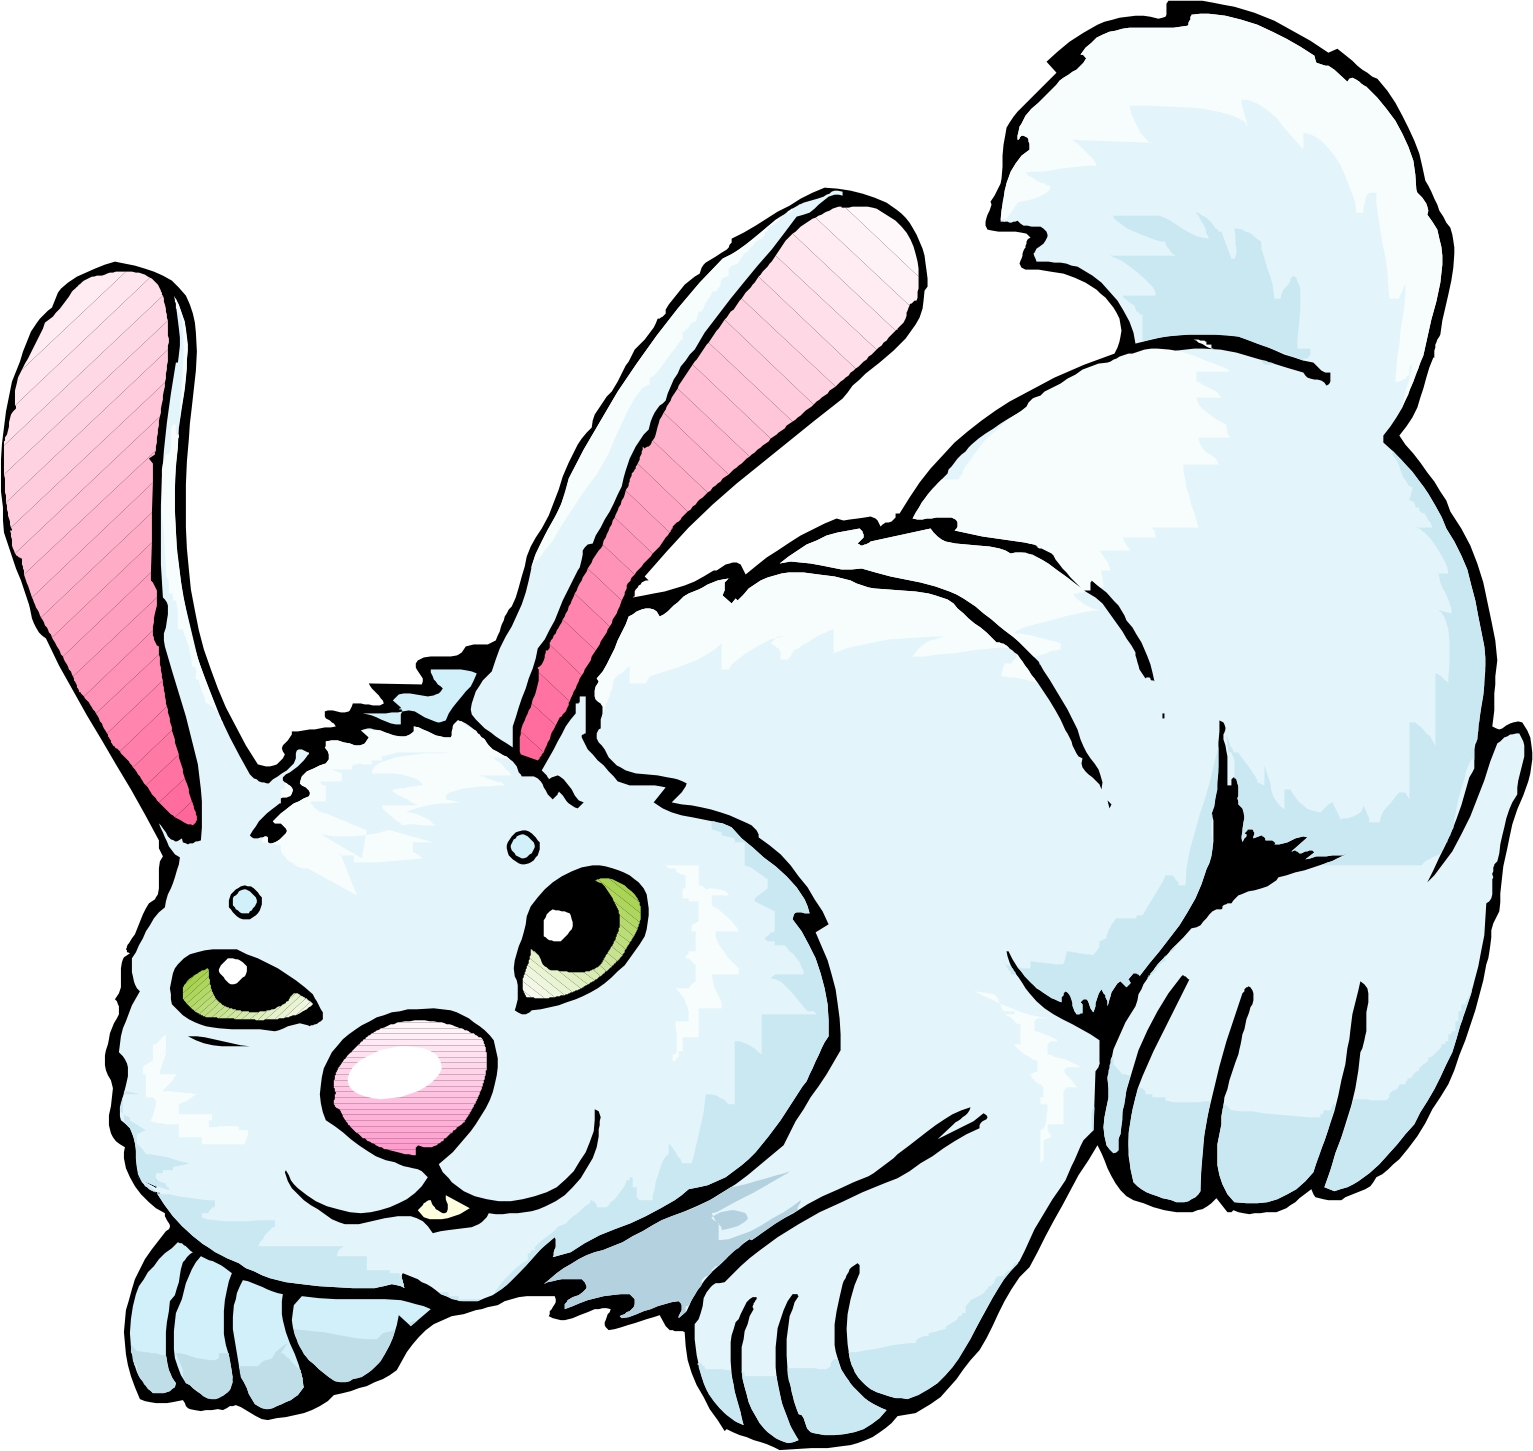 Cute Rabbit Cartoon Images & Pictures - Becuo - Cliparts.co